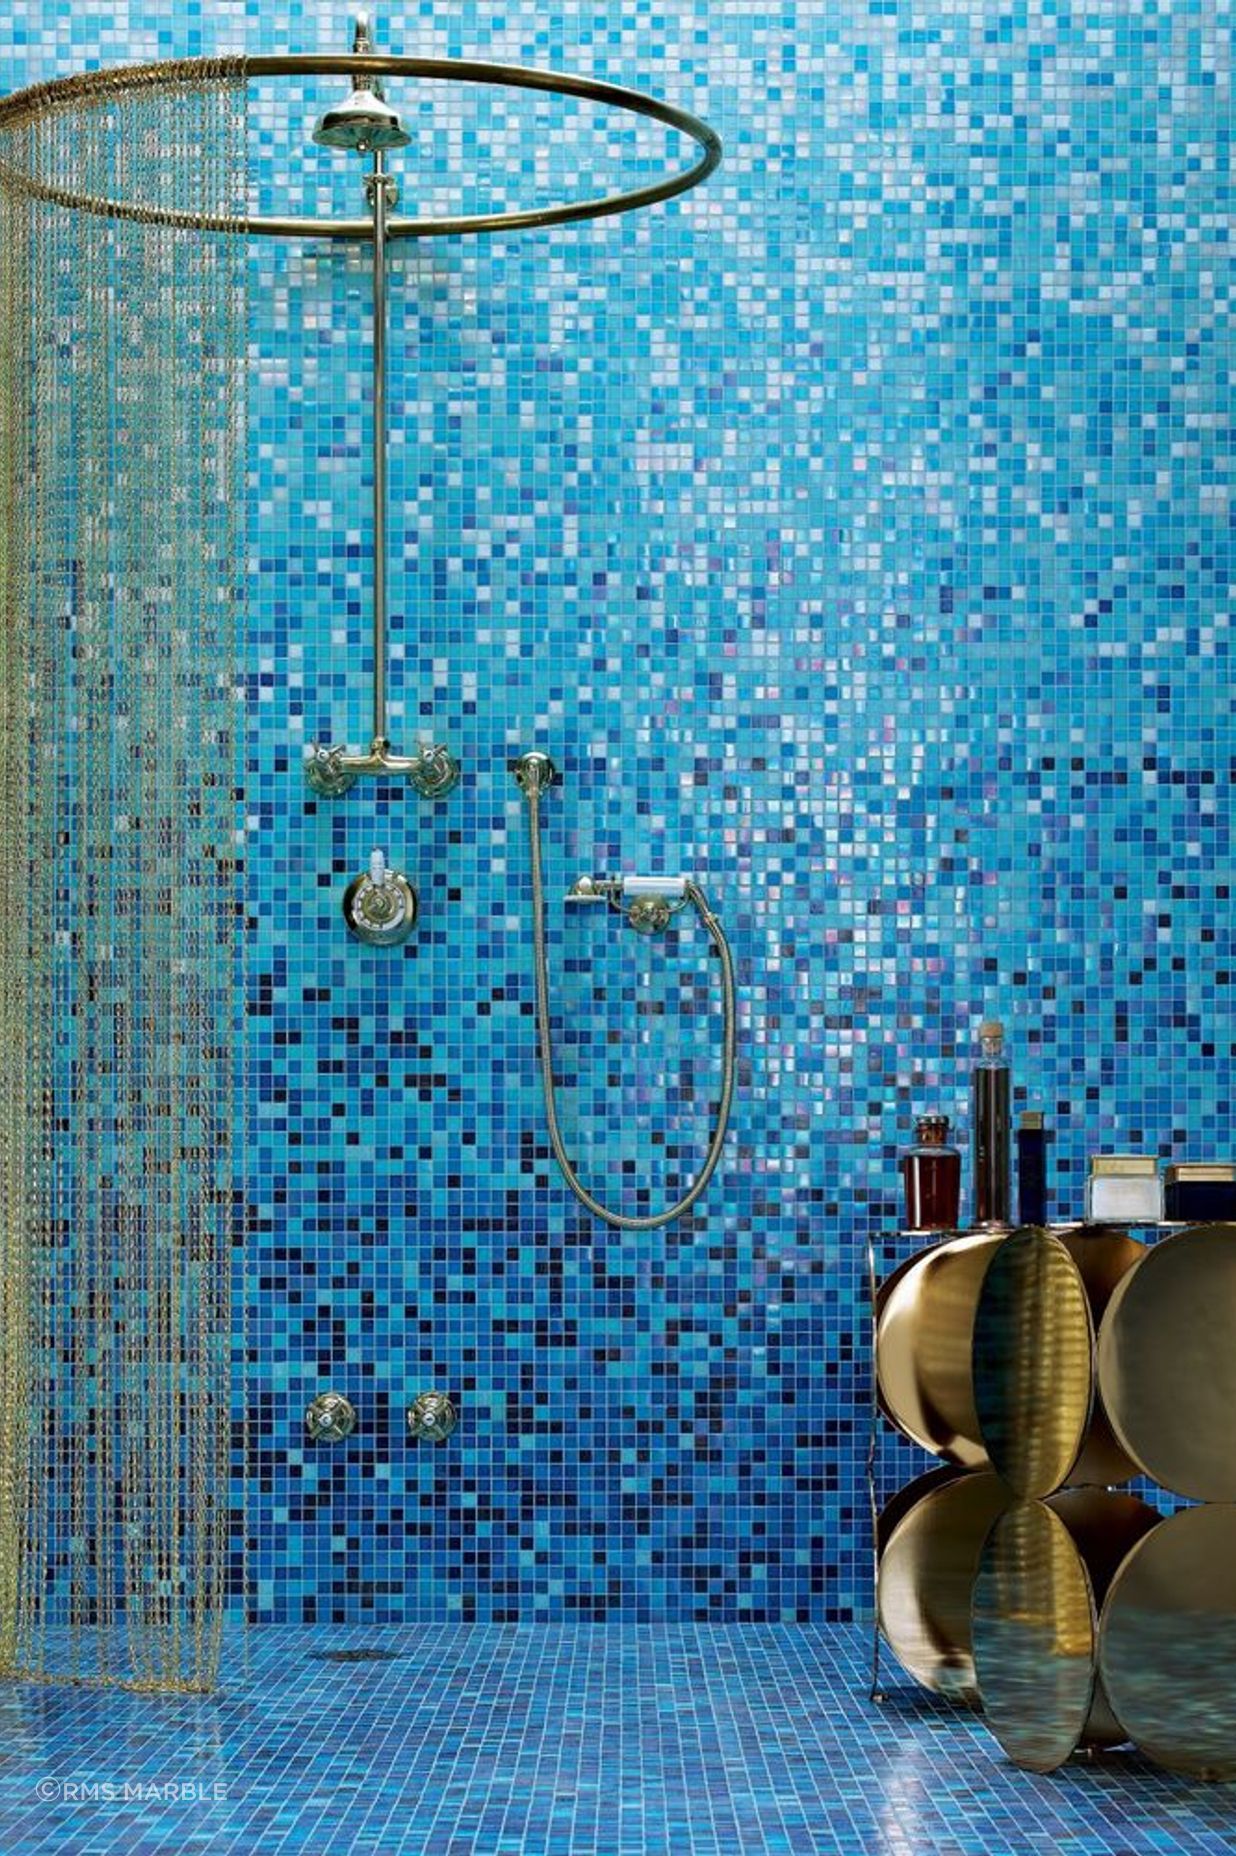 Mosaic tiles look stunning in the right environment. Featured Product: Bisazza Mosaic Tiles by RMS Marble